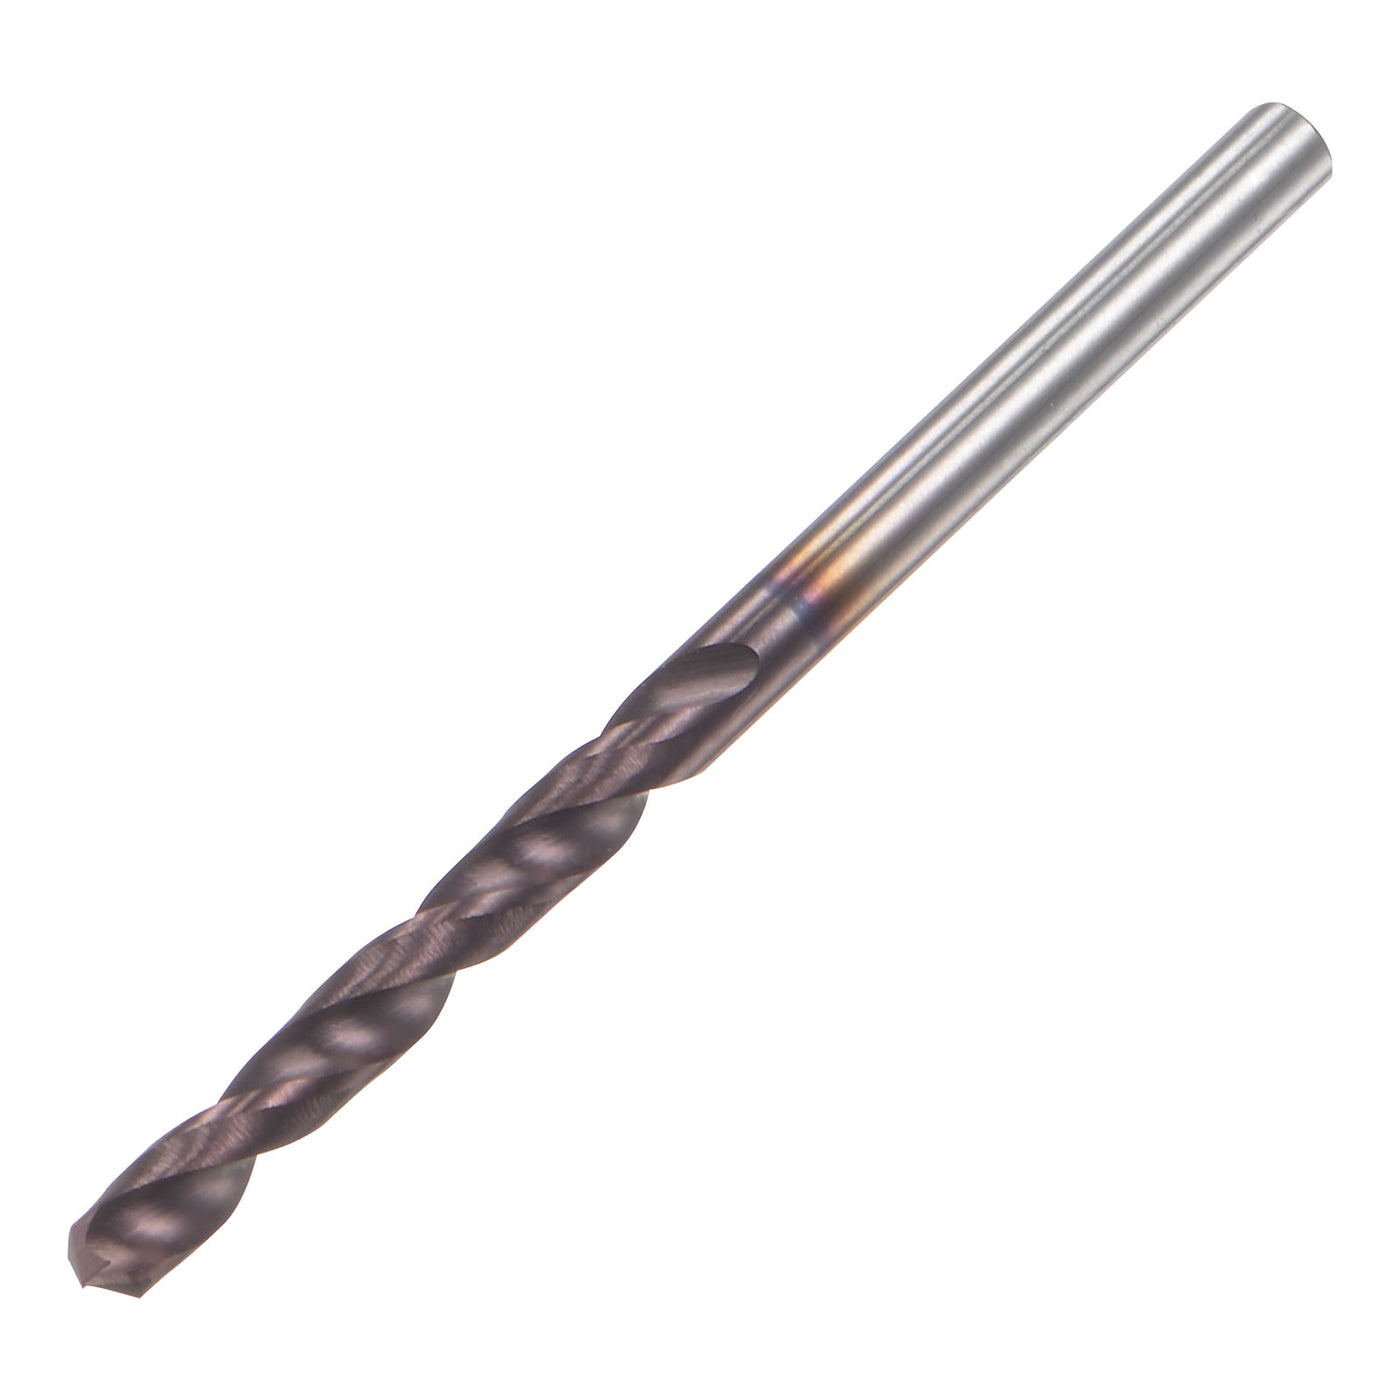 uxcell Uxcell 2.3mm DIN K45 Tungsten Carbide AlTiSin Coated Drill Bit for Stainless Steel